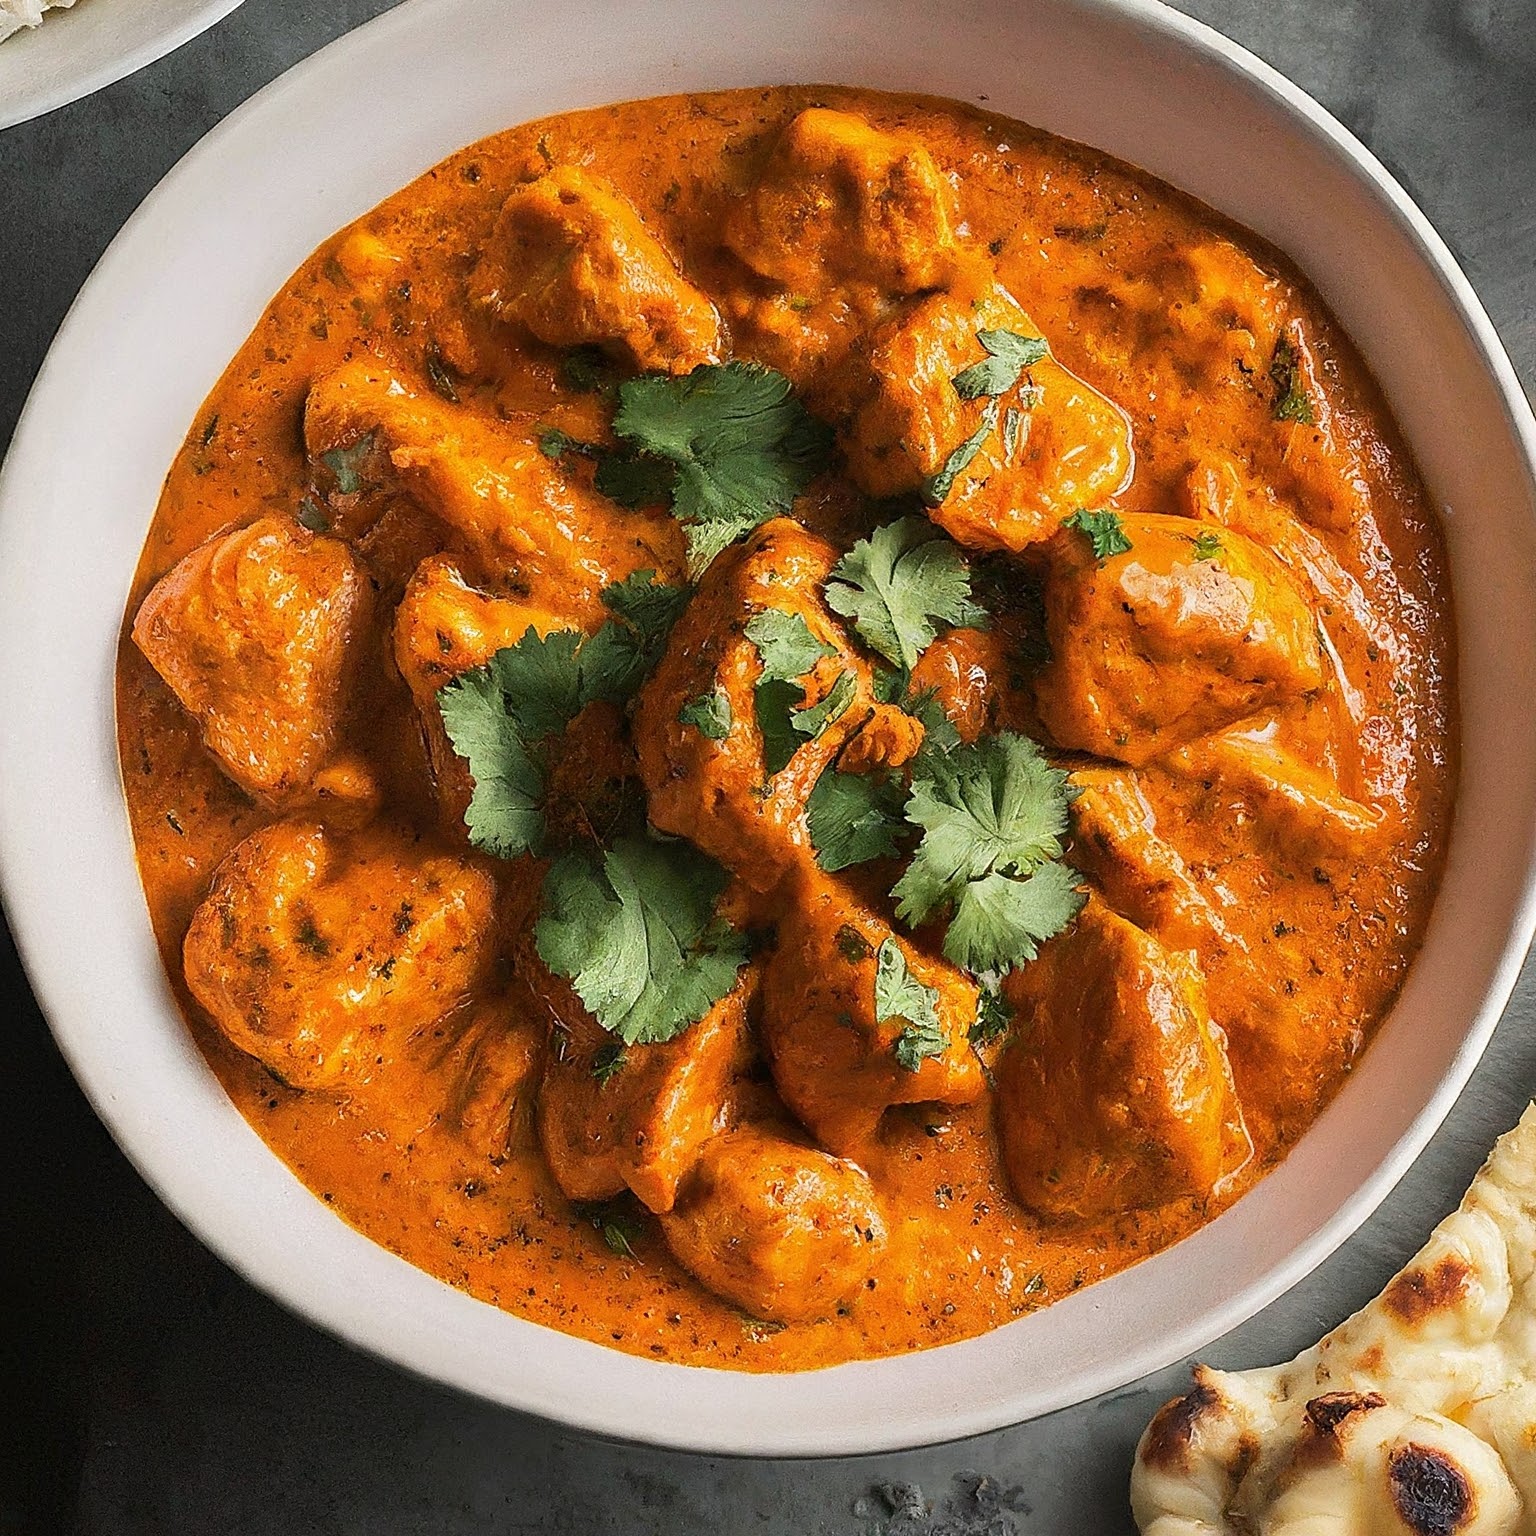 A delicious bowl of butter chicken with tender chicken in a creamy tomato sauce garnished with cilantro.